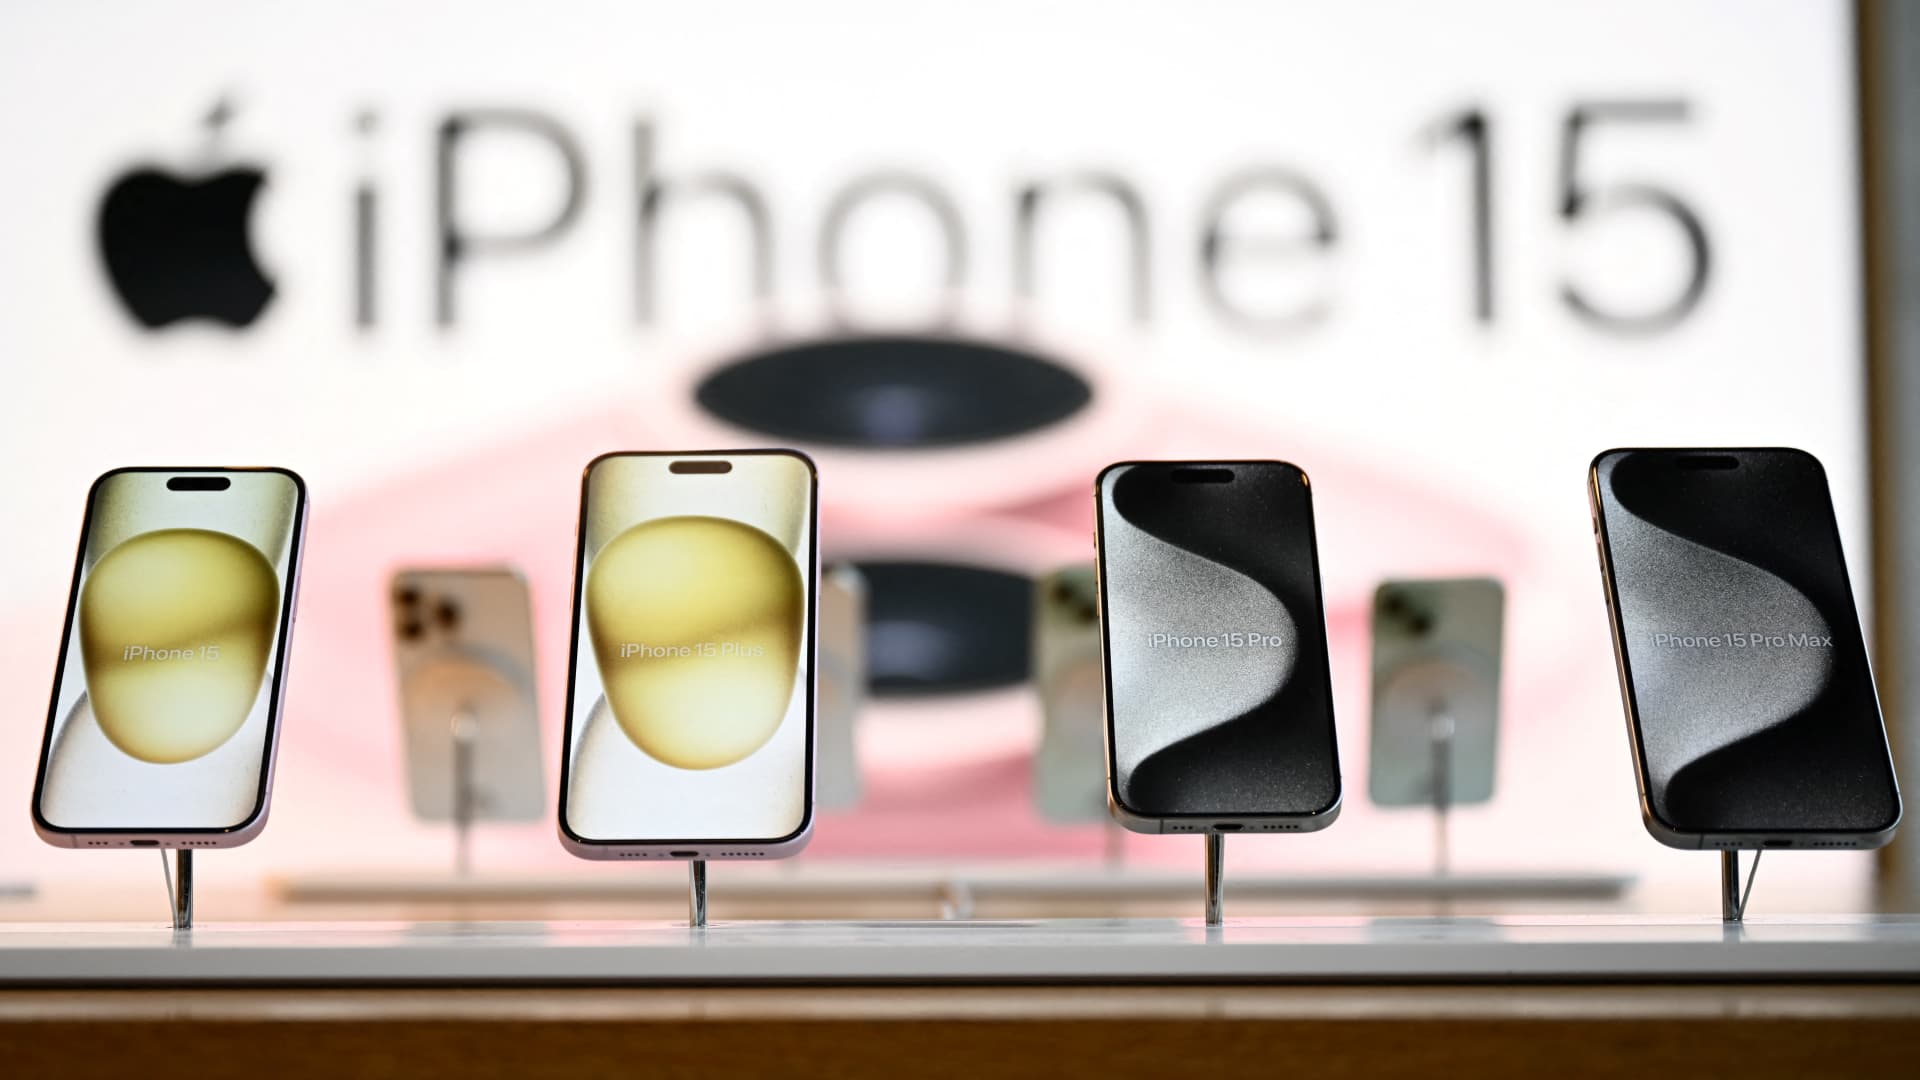 Apple Apple iphone product gross sales drop 19% in China as Huawei want soars: Counterpoint